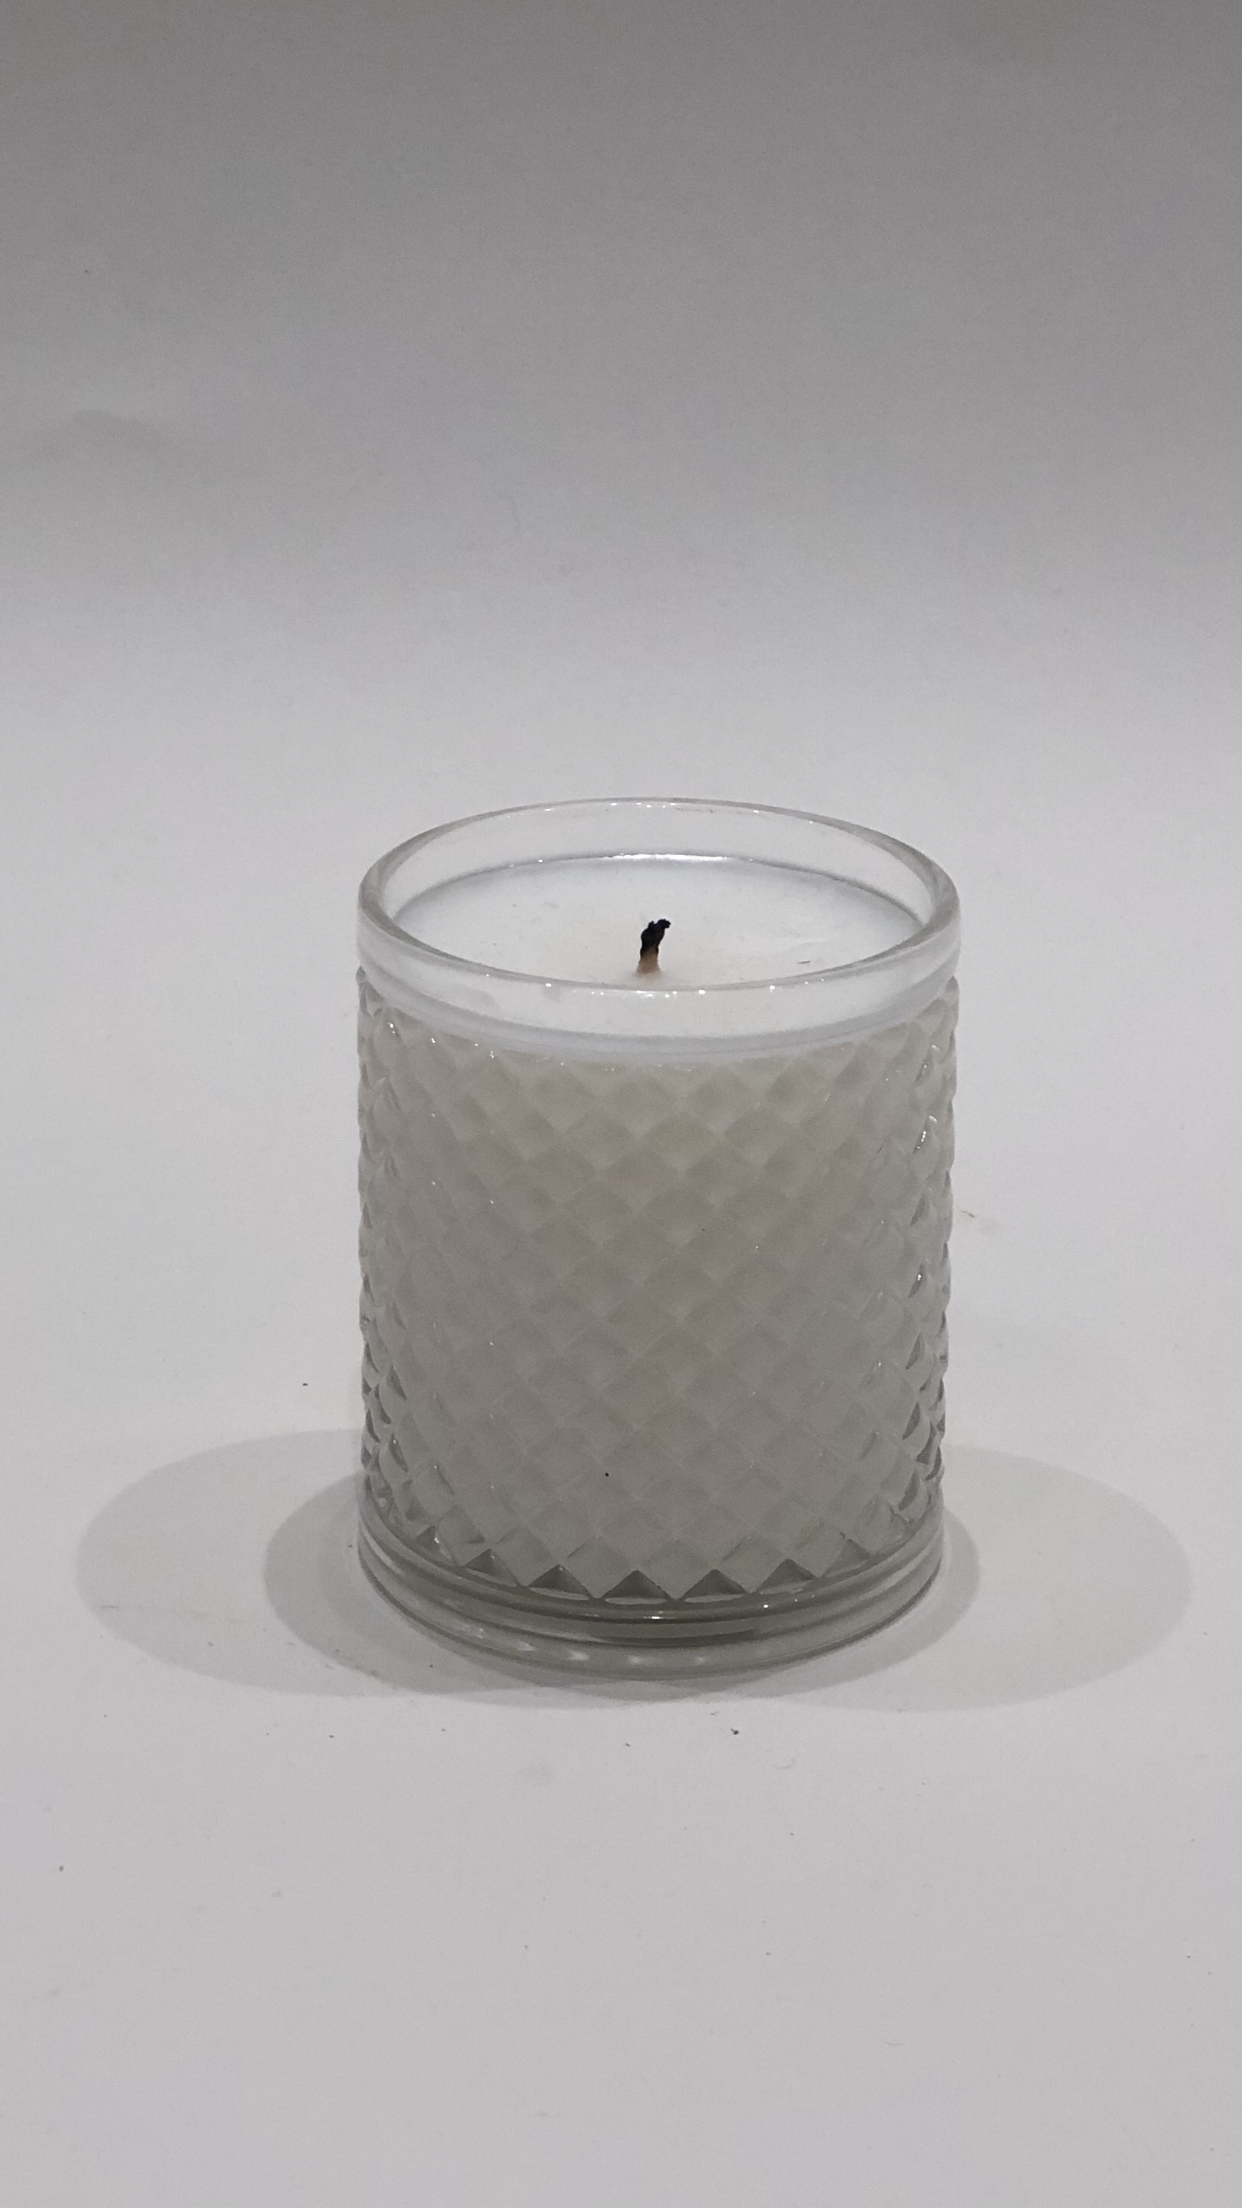 7oz Agraria Lavender and Rosemary Candle